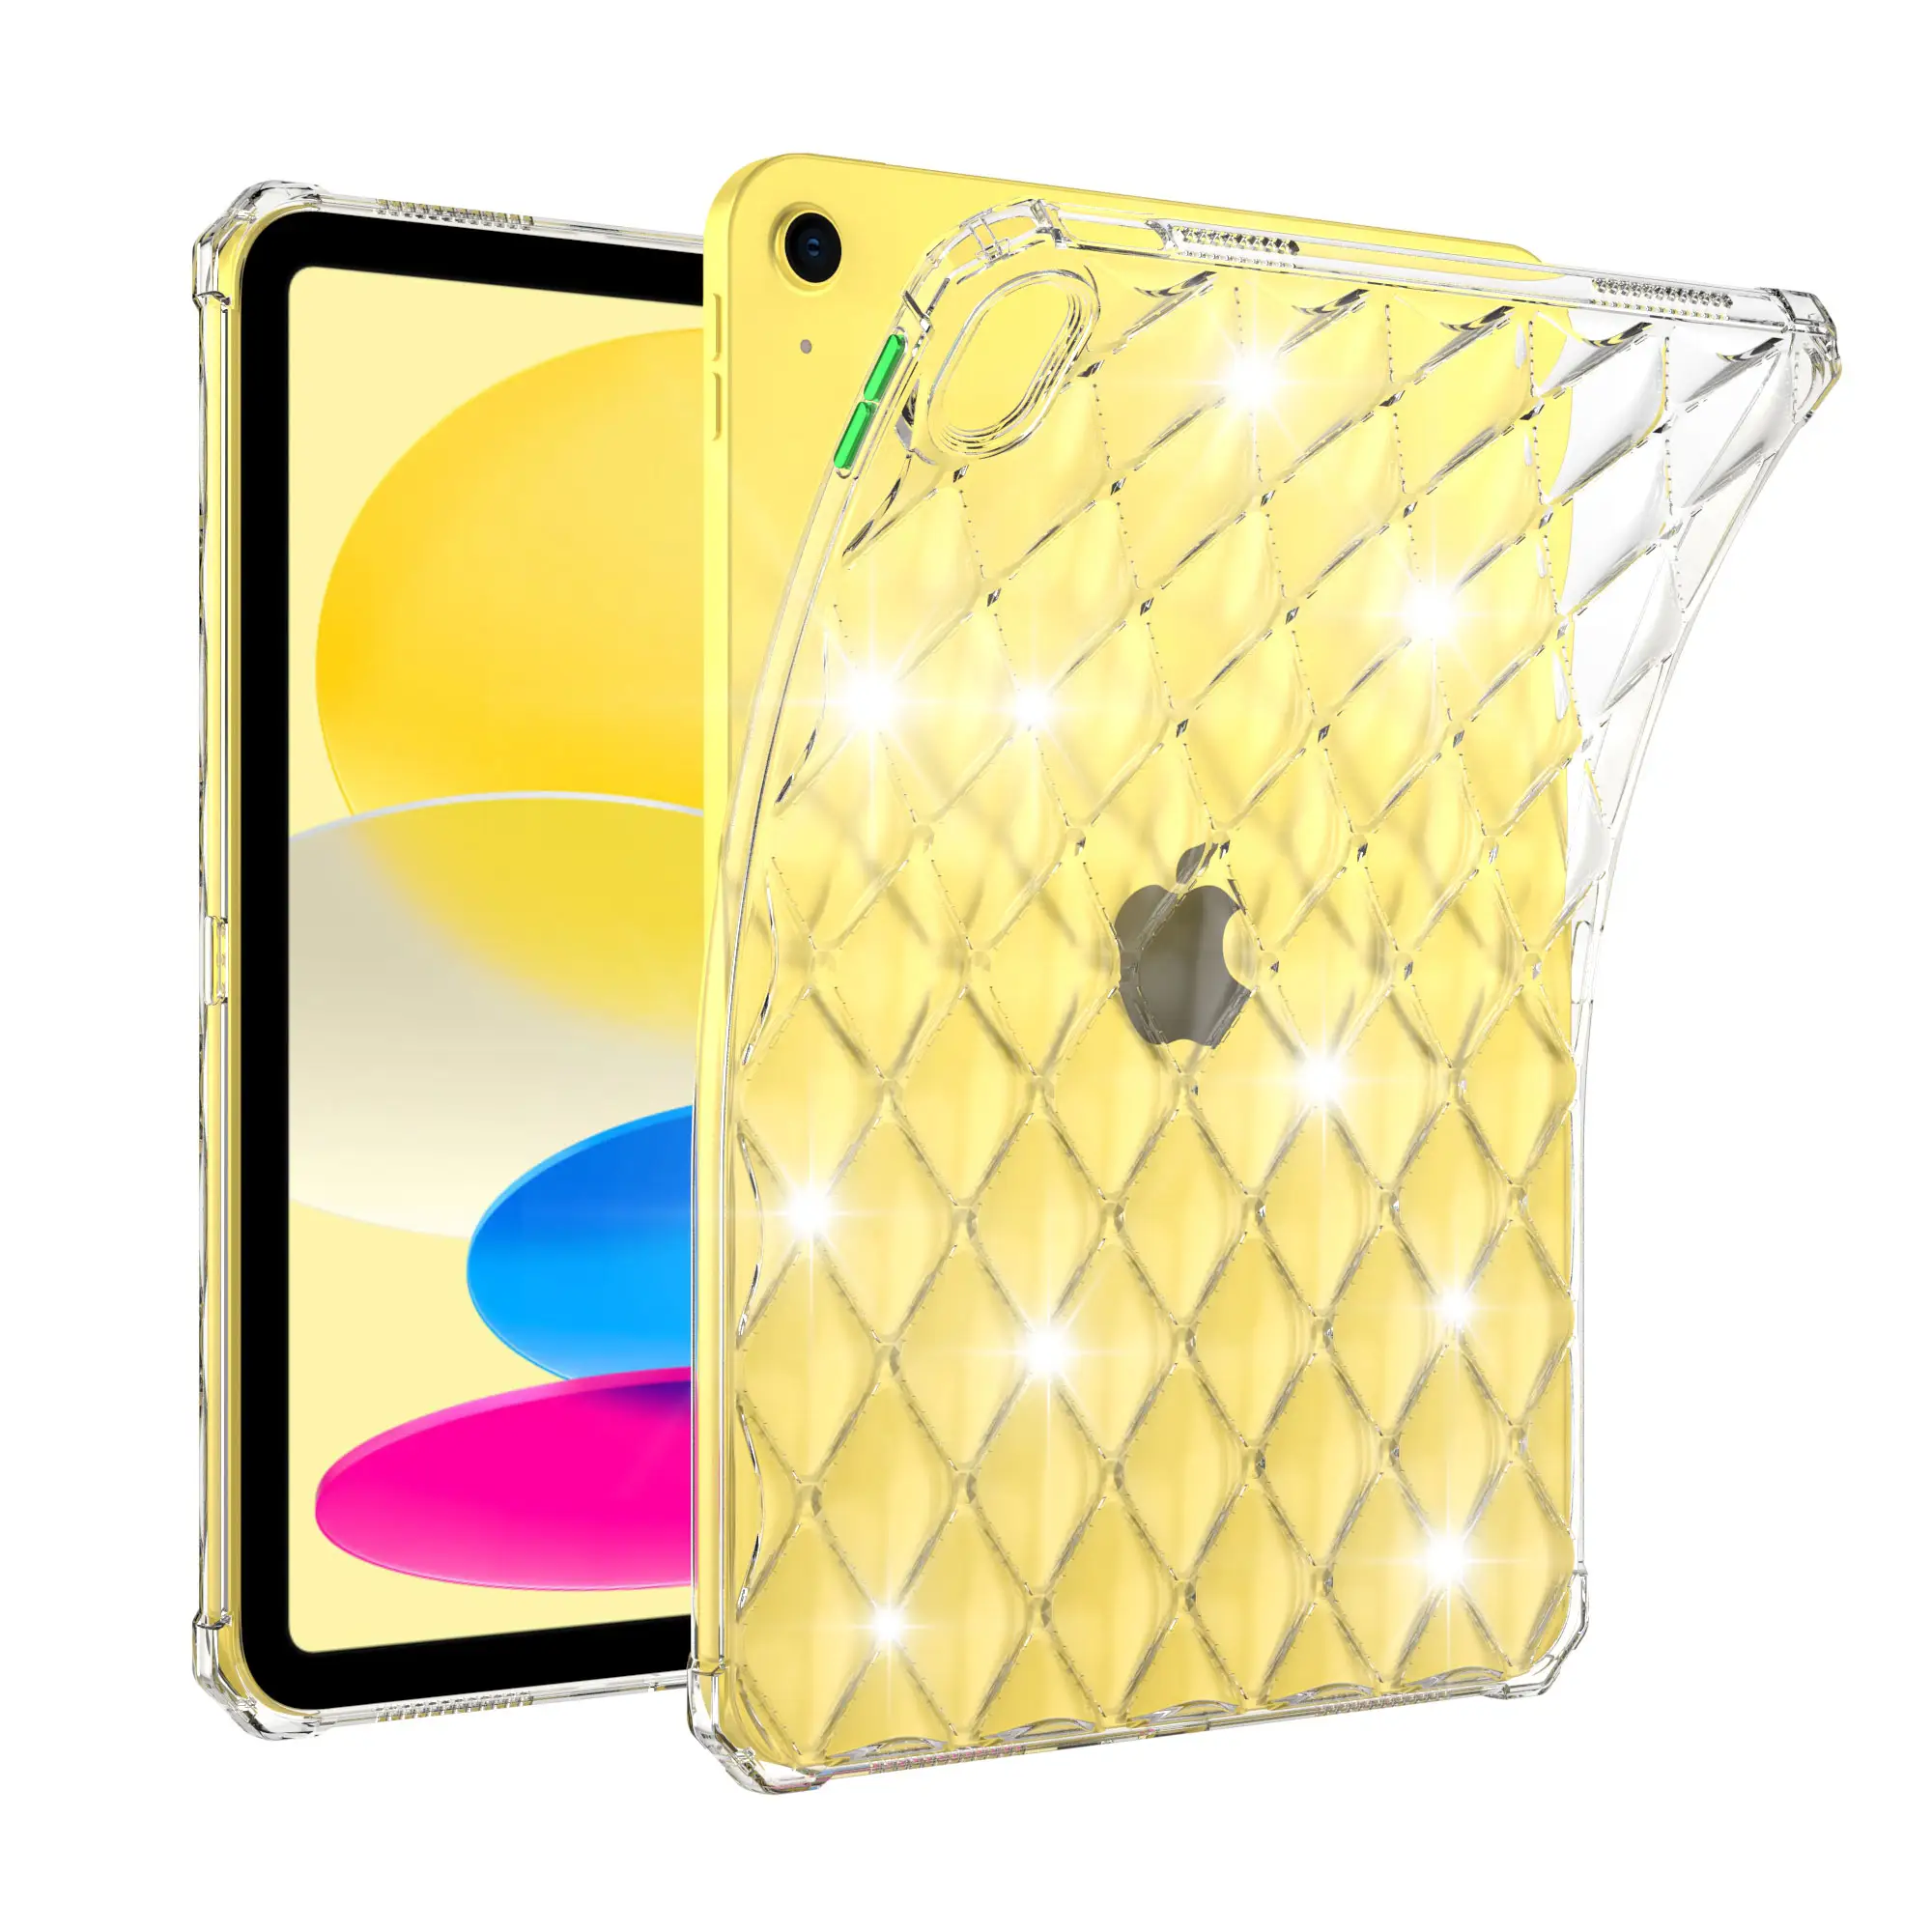 Suit for Apple iPad 10th generation flat panel protective cover Transparent rhomboid anti drop flat plate shell